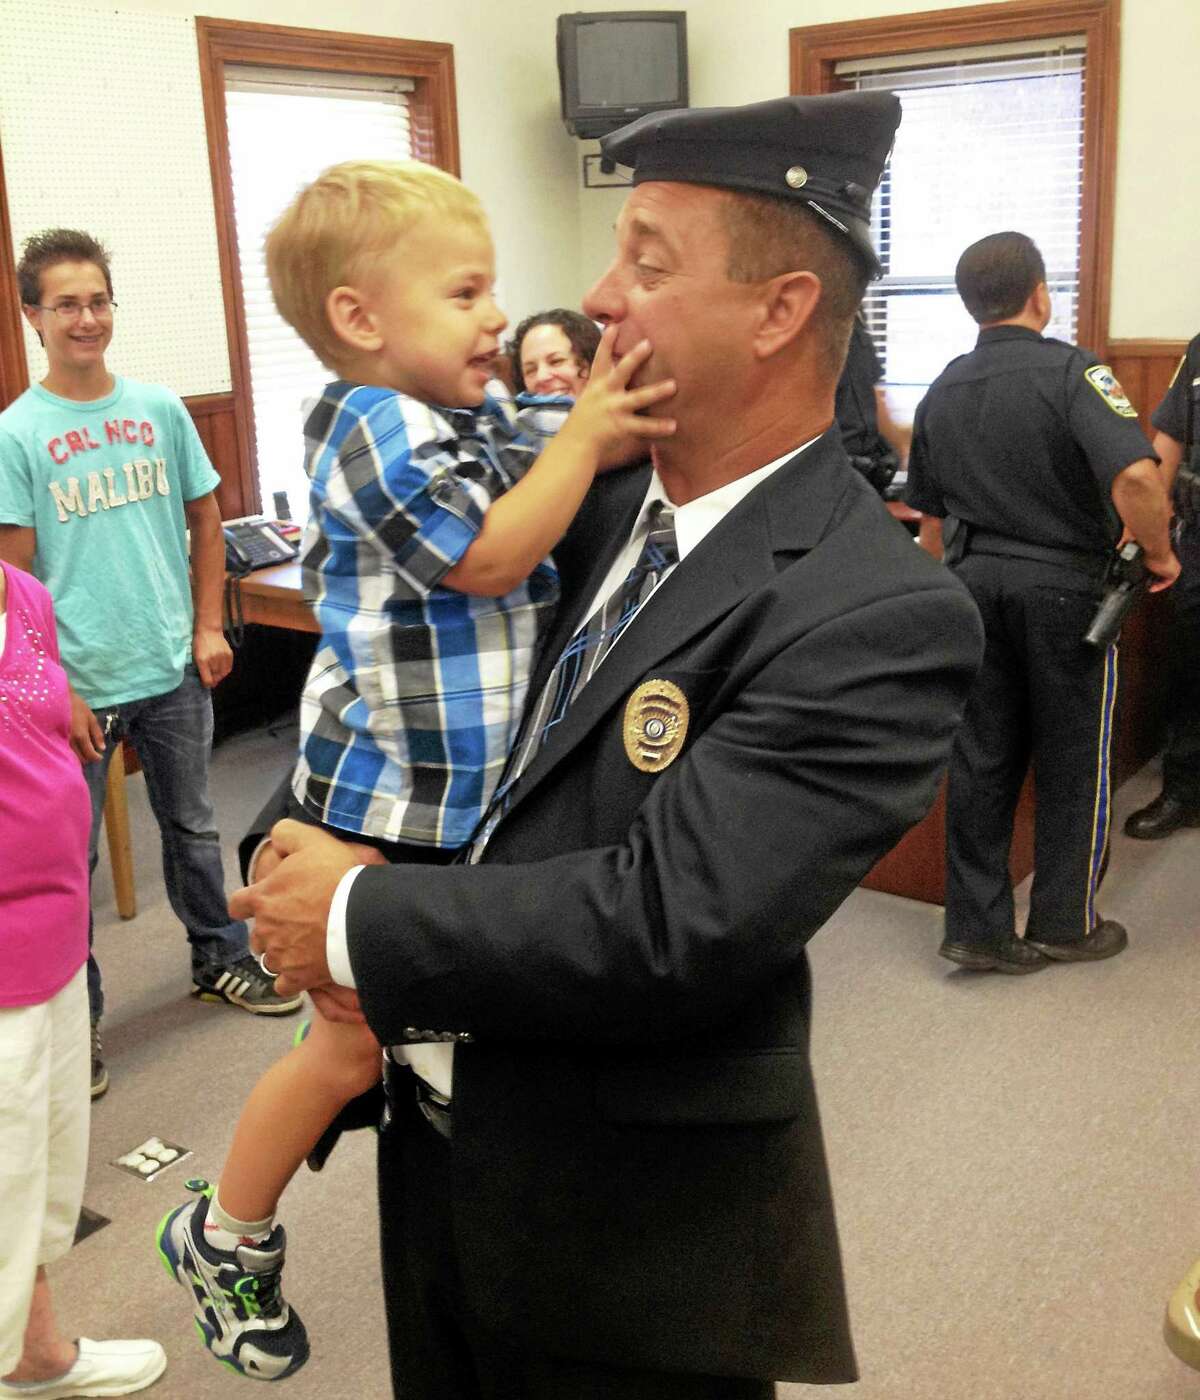 Former Middletown Police Officer Paul Liseo was sworn in Friday morning as a member of the Portland Police Department, replacing retiring Eric L. Grant.